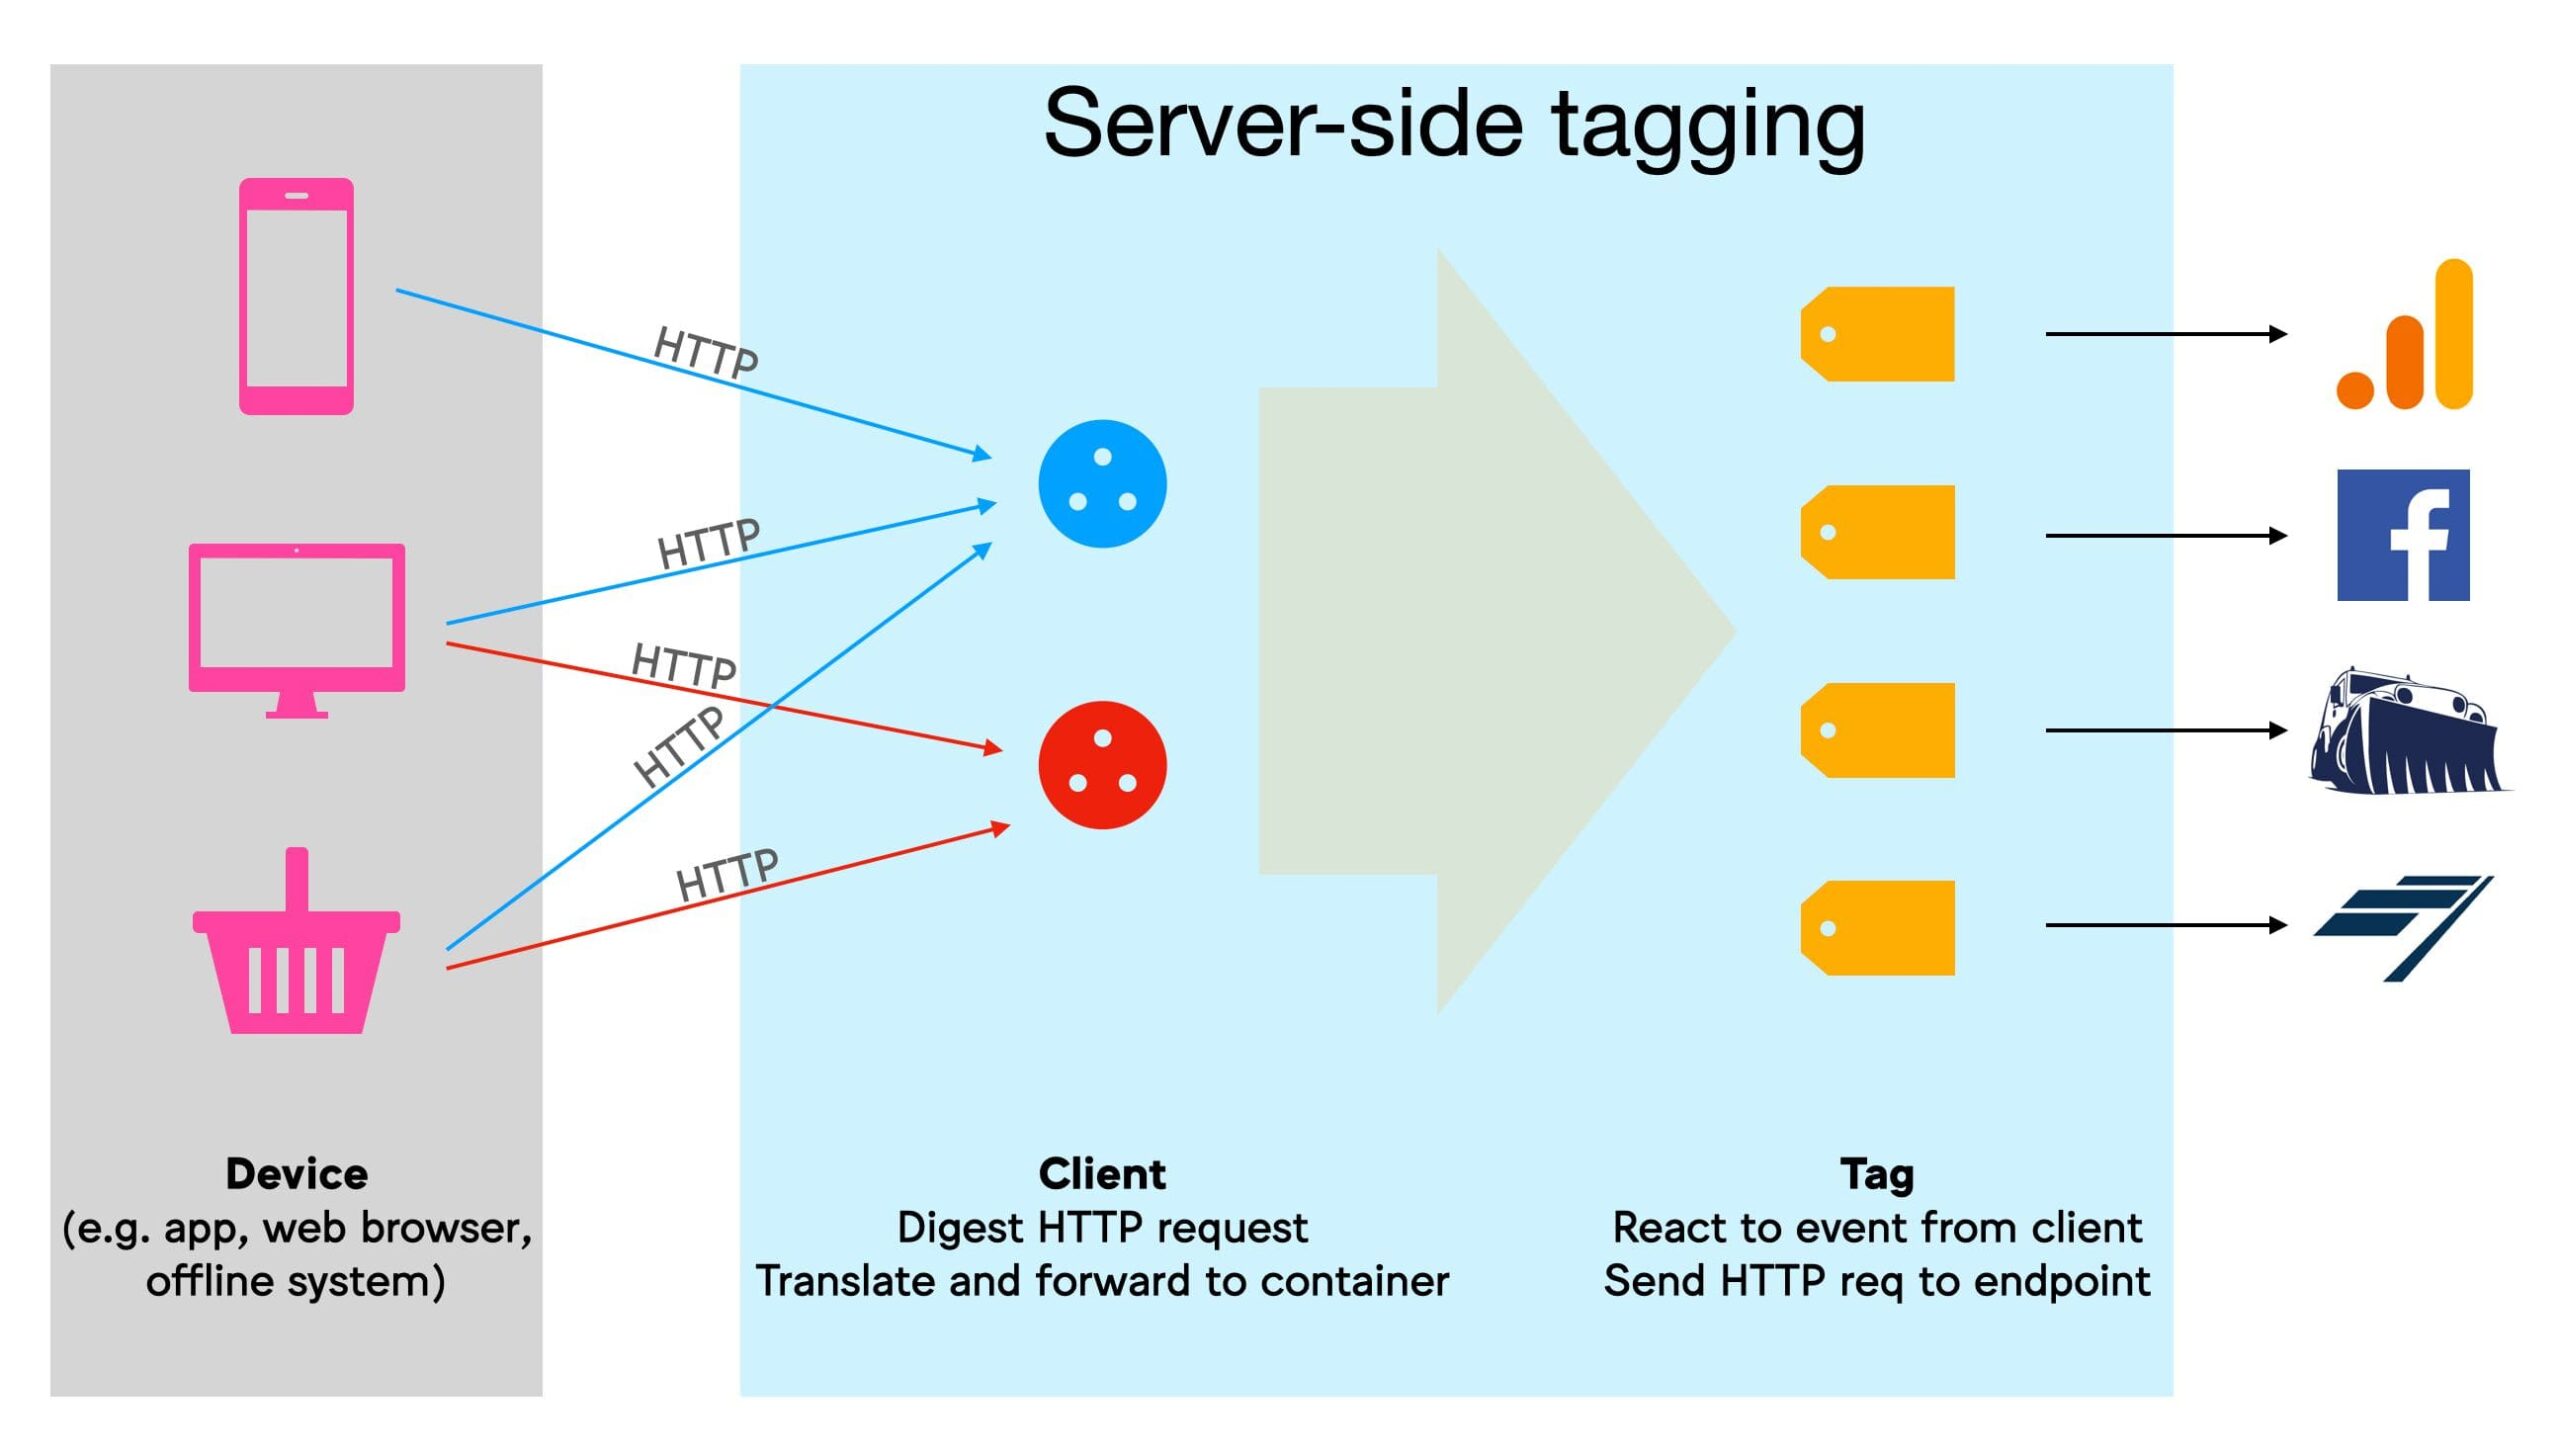 Server-side Tagging In Google Tag Manager - Simo Ahava